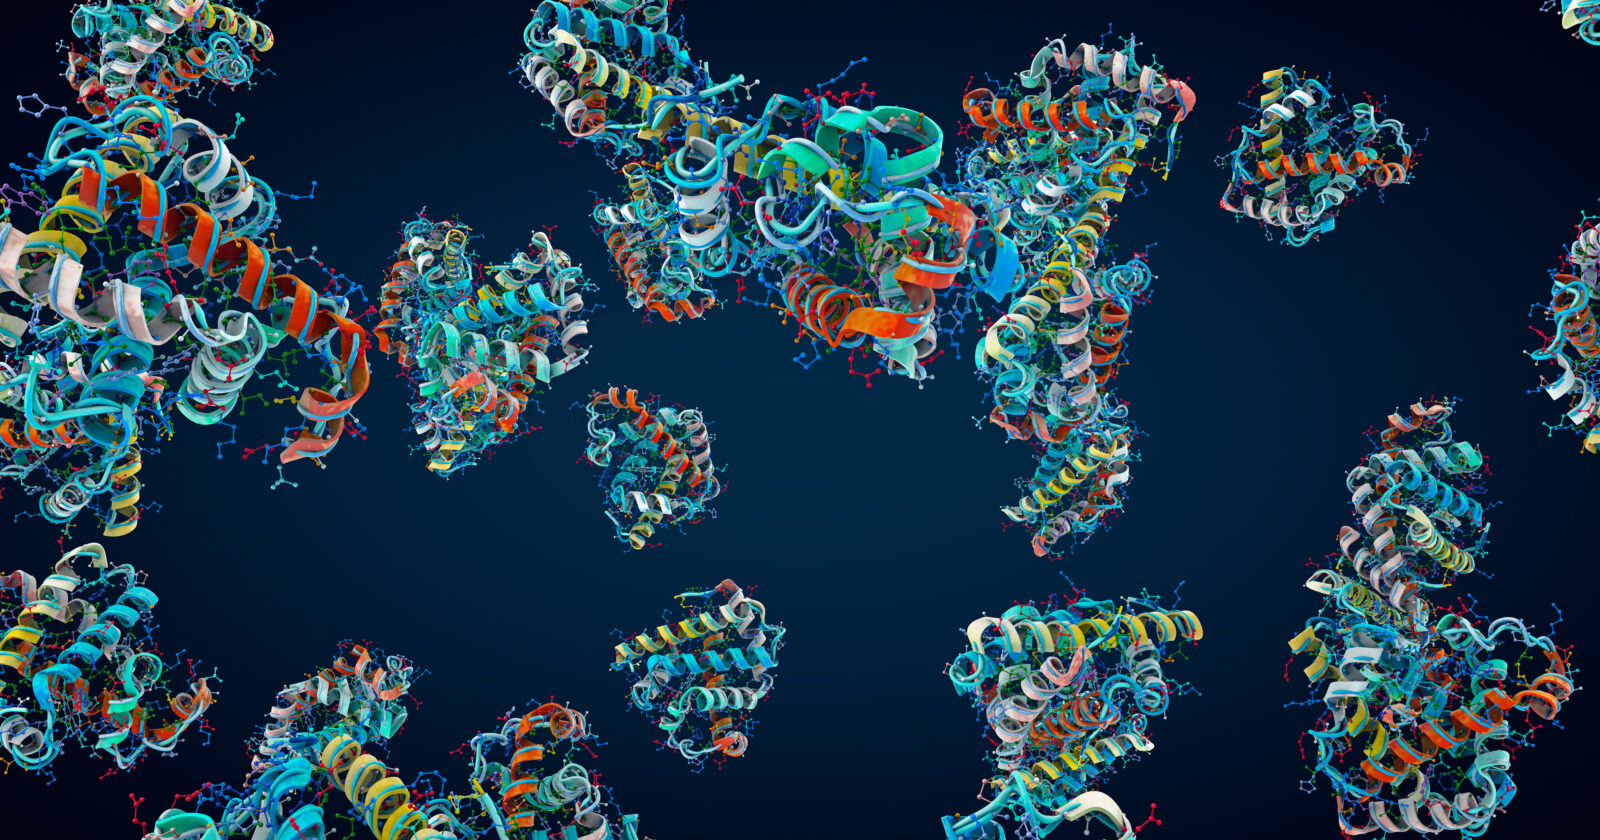 Colorful chain of amino acids or bio molecules called proteins - 3d illustration